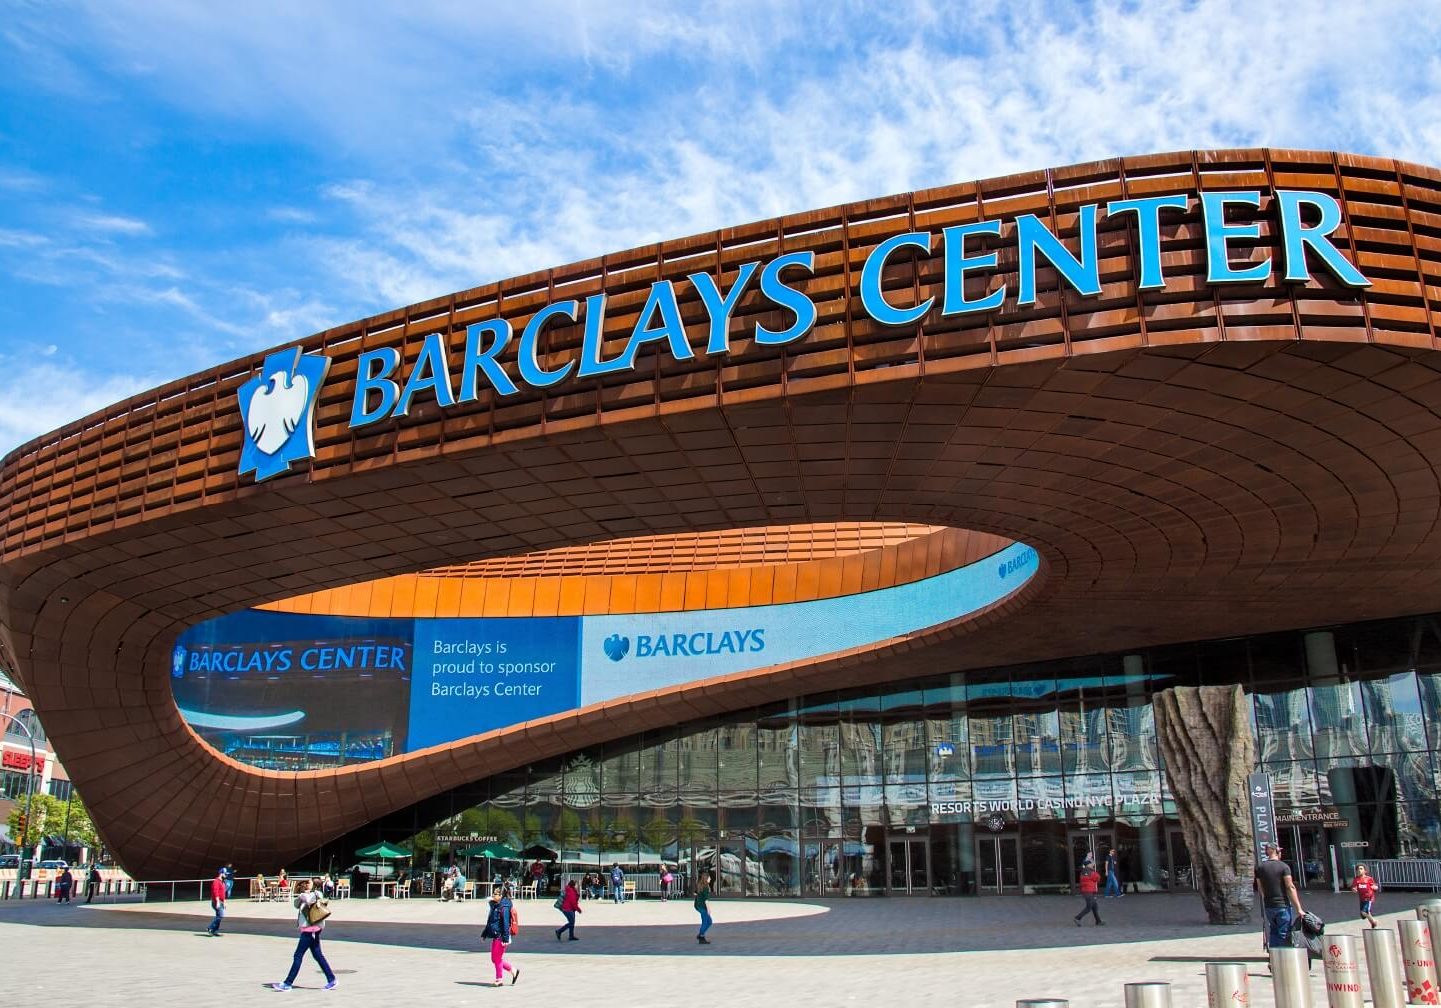 The entrance to Barclays Center, right across the street from Heritage Dean